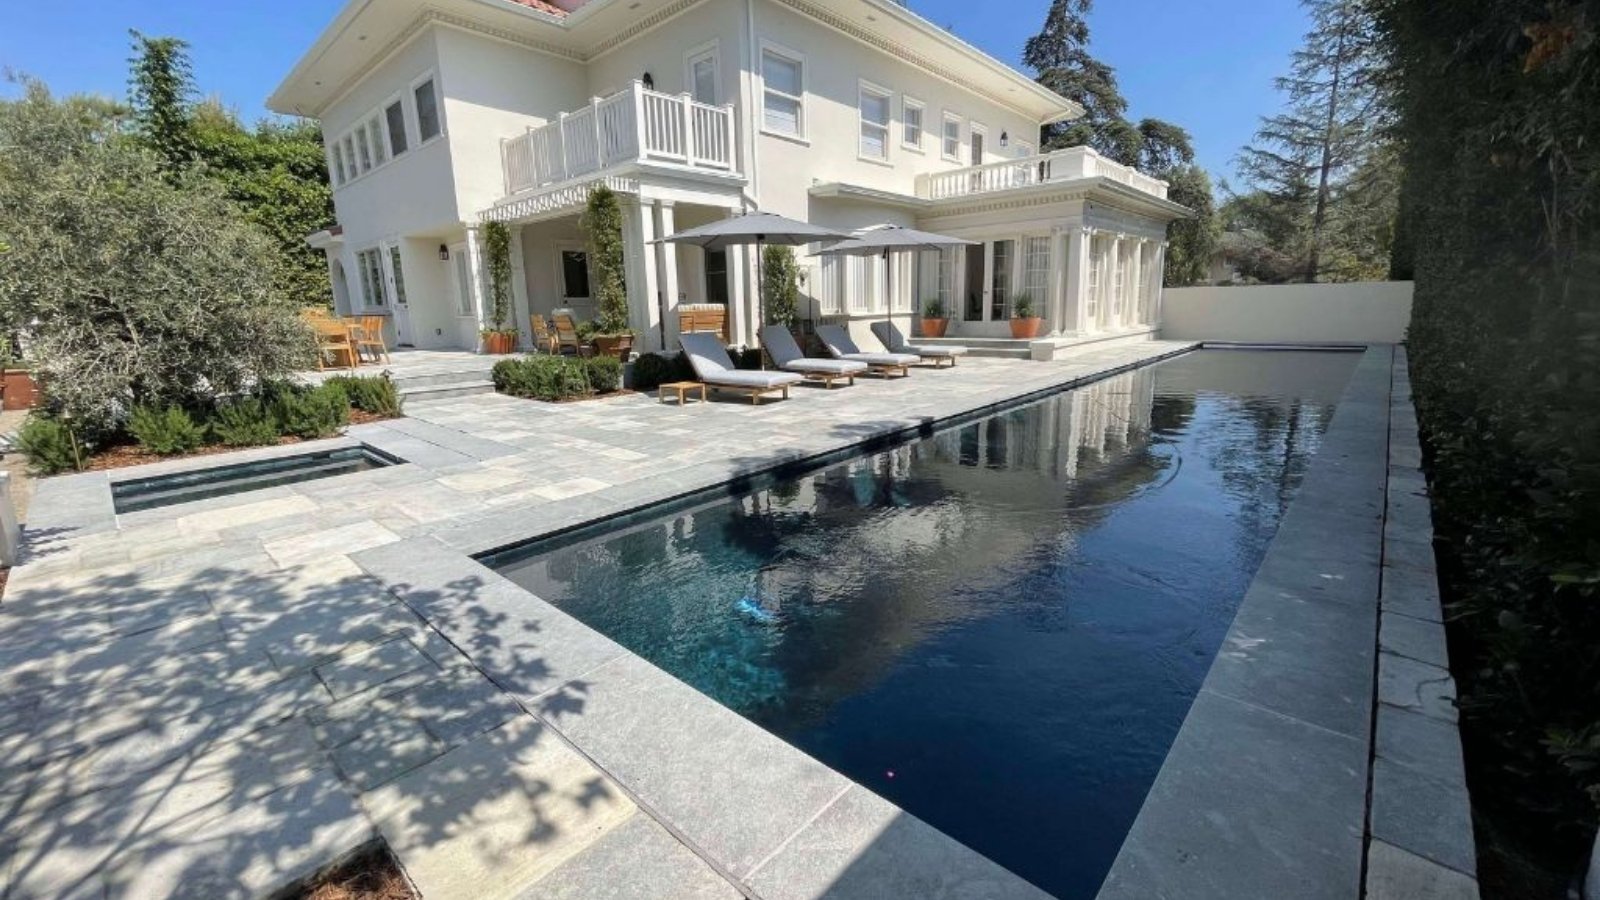 The Cost of Building a Pool in Los Angeles